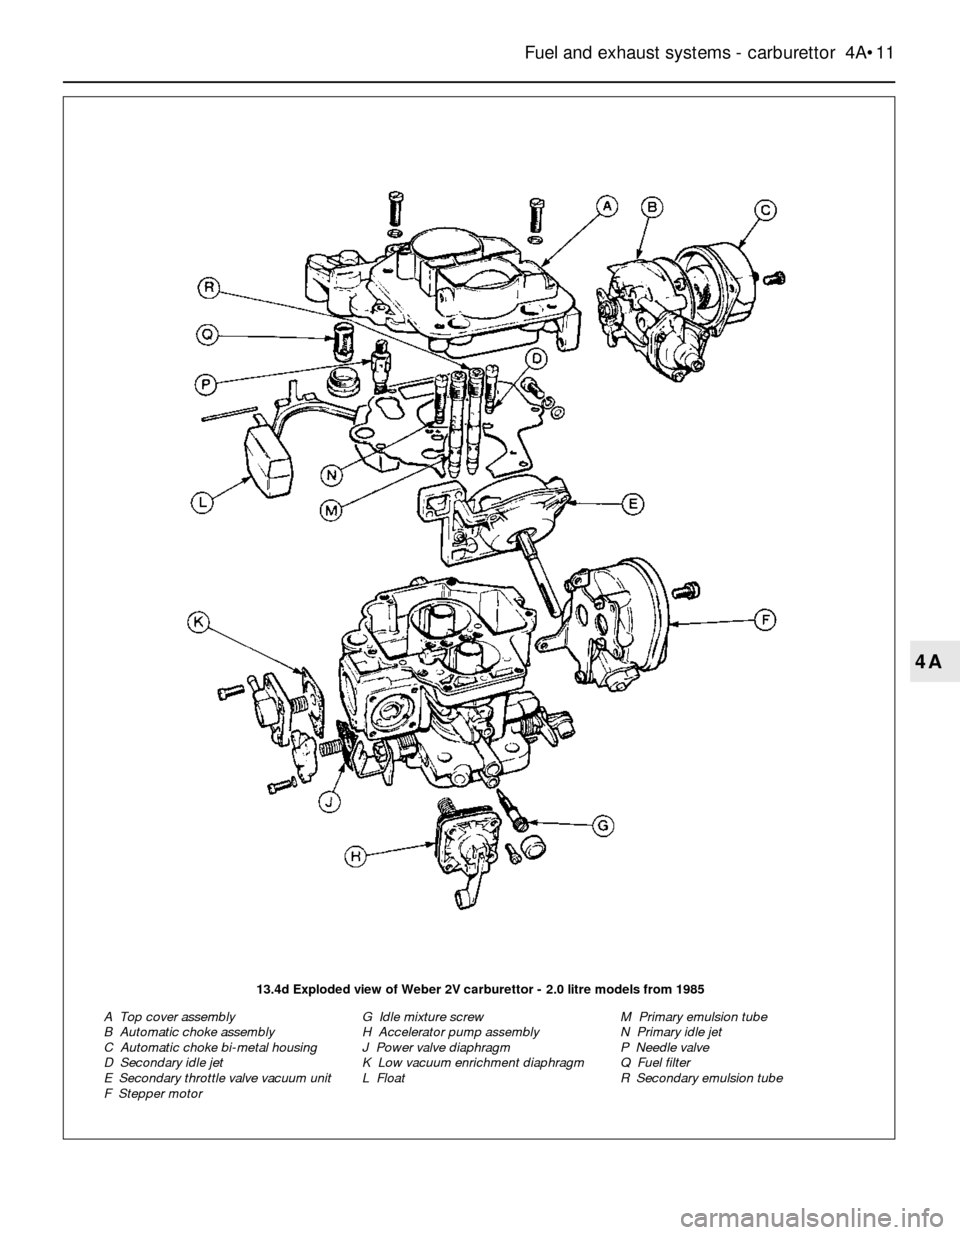 FORD SIERRA 1989 2.G Fuel And Exhaust Systems Carburettor User Guide Fuel and exhaust systems - carburettor  4A•11
4A
13.4d Exploded view of Weber 2V carburettor - 2.0 litre models from 1985
A  Top cover assembly
B  Automatic choke assembly
C  Automatic choke bi-meta